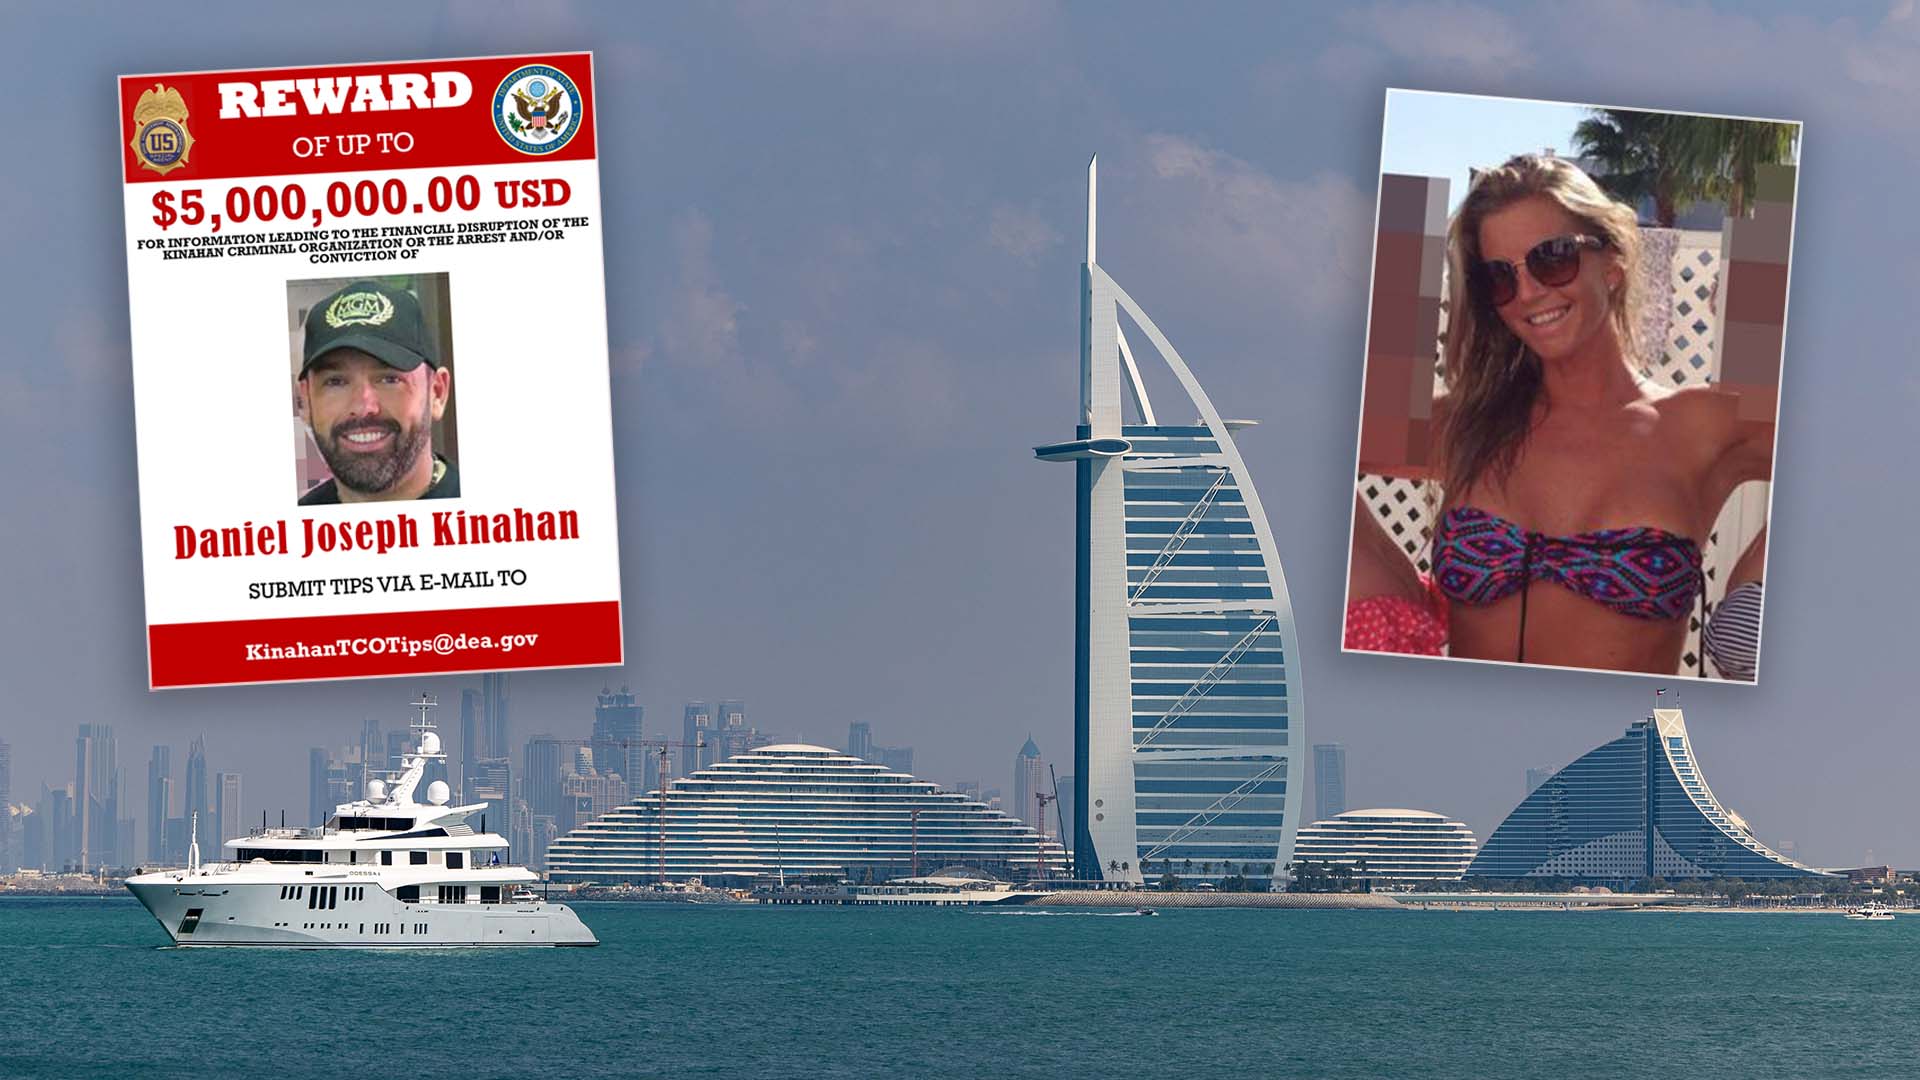 Photo of Dubai's skyline across the water, with inset images showing a Rewards poster for Daniel Kinahan and a head and shoulders photo of Caoimhe Robinson wearing sunglasses.